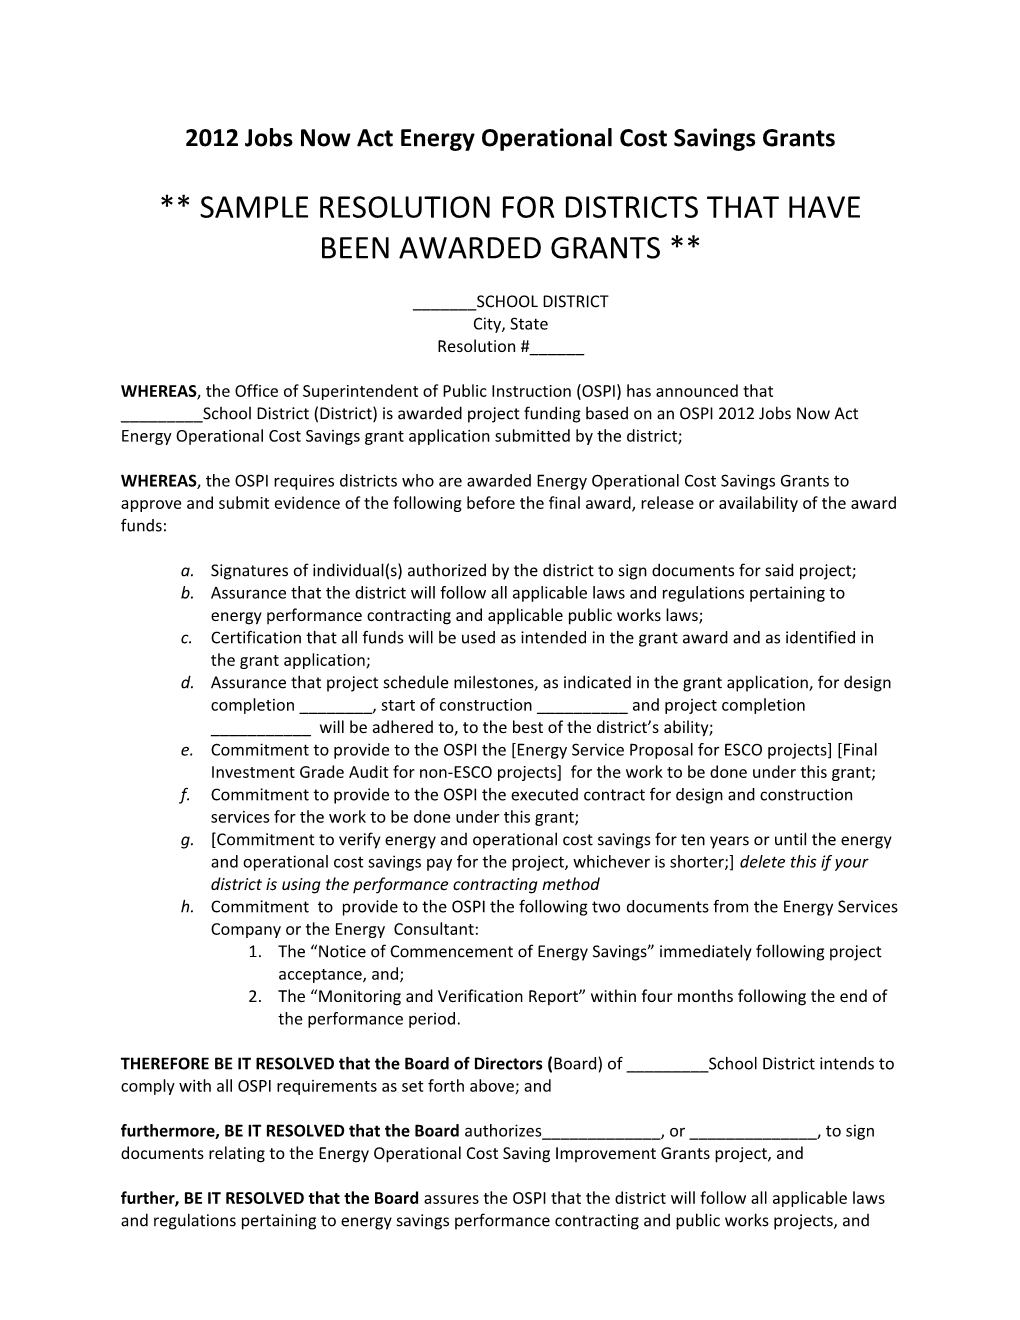 Sample Resolution for Districts That Have Been Awarded Grants